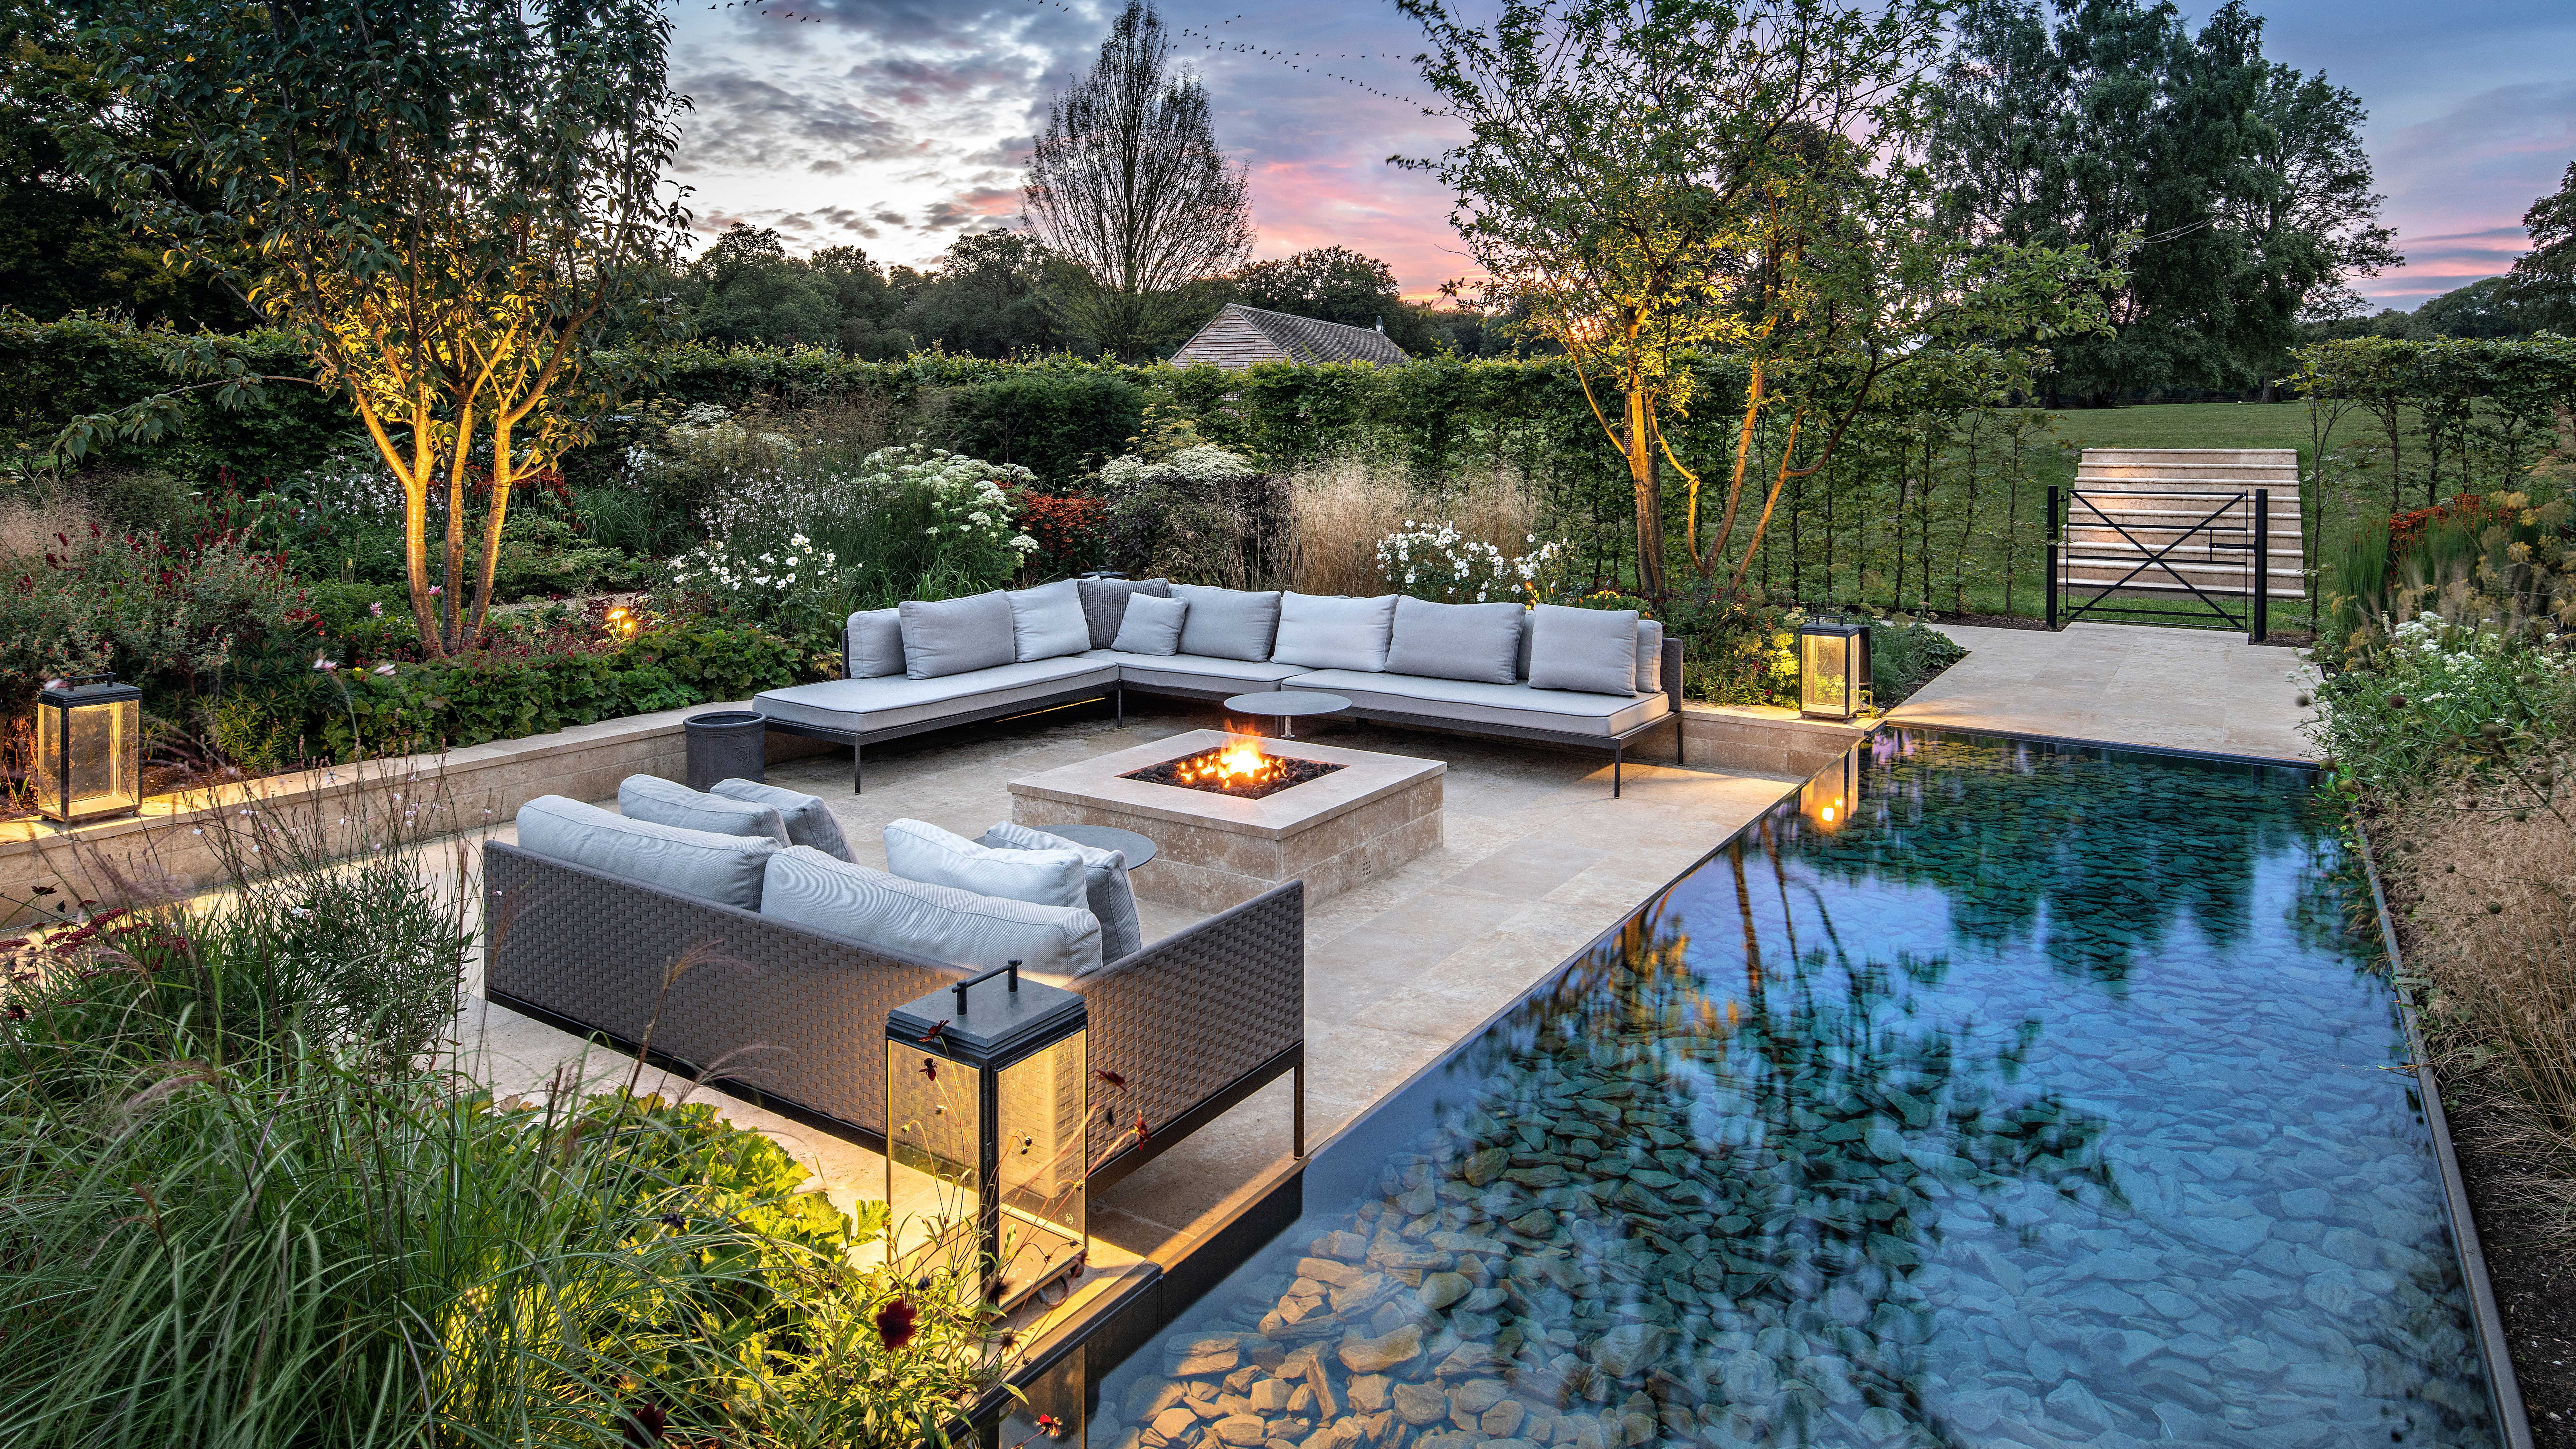 3 Must-Haves for Installing Low Voltage Landscape Lighting - Ideas & Advice